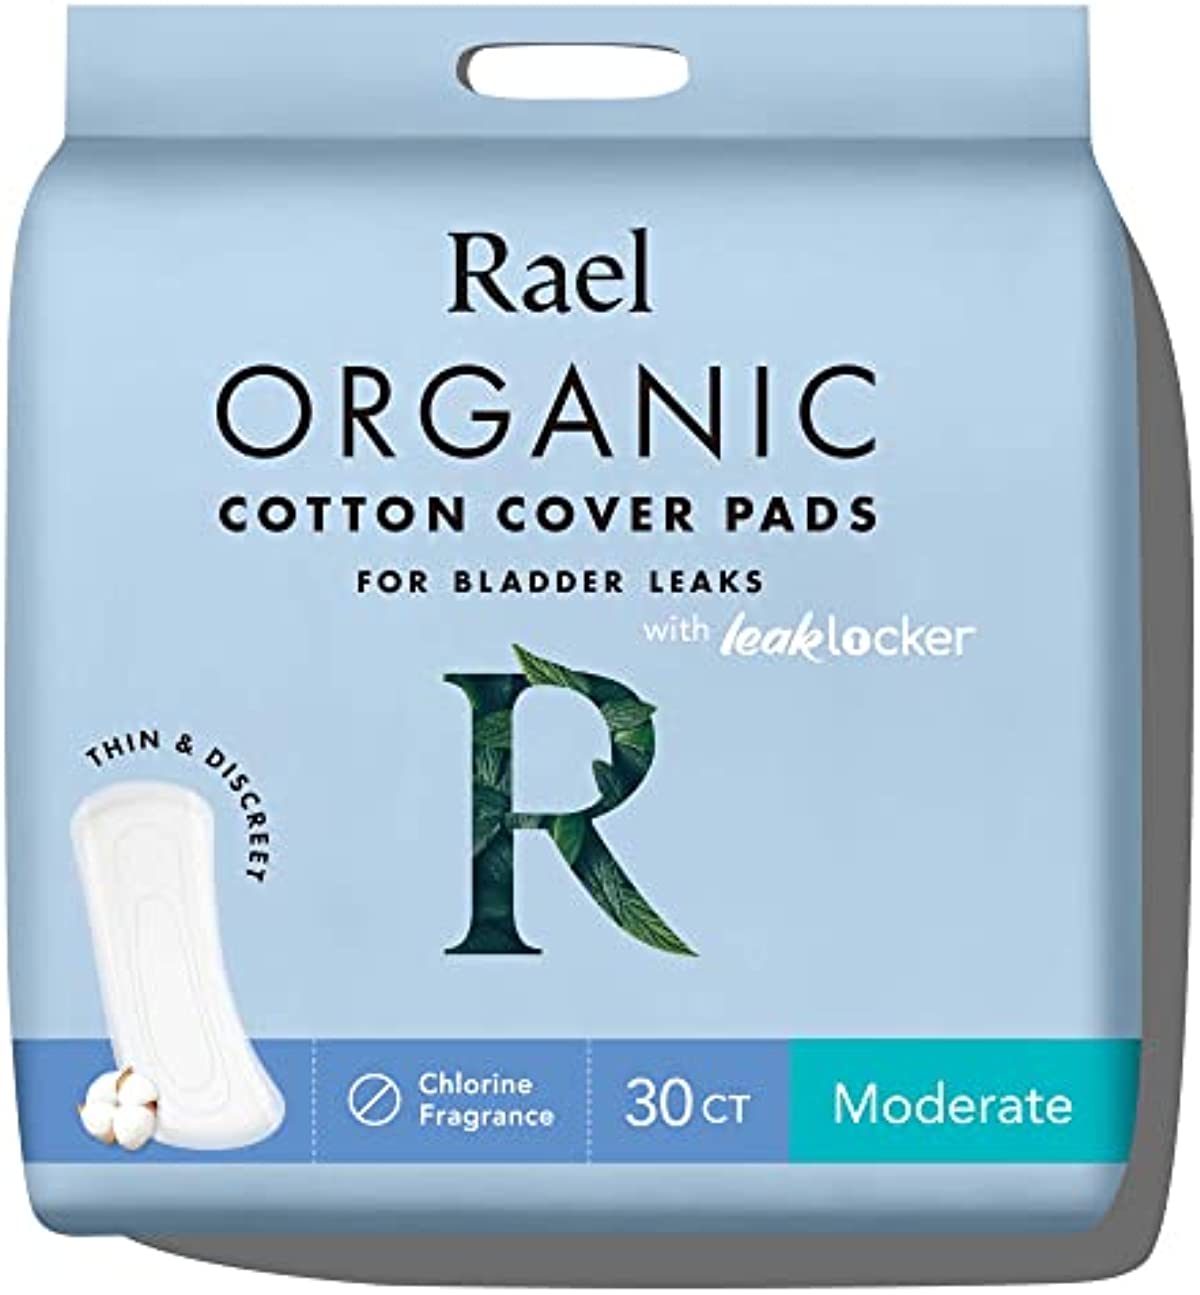 Rael Organic Incontinence Pads Moderate Organic Bladder Control and Postpartum Pads, 4 Layer Core with Leak Guard Technology, Postpartum (30 Count)